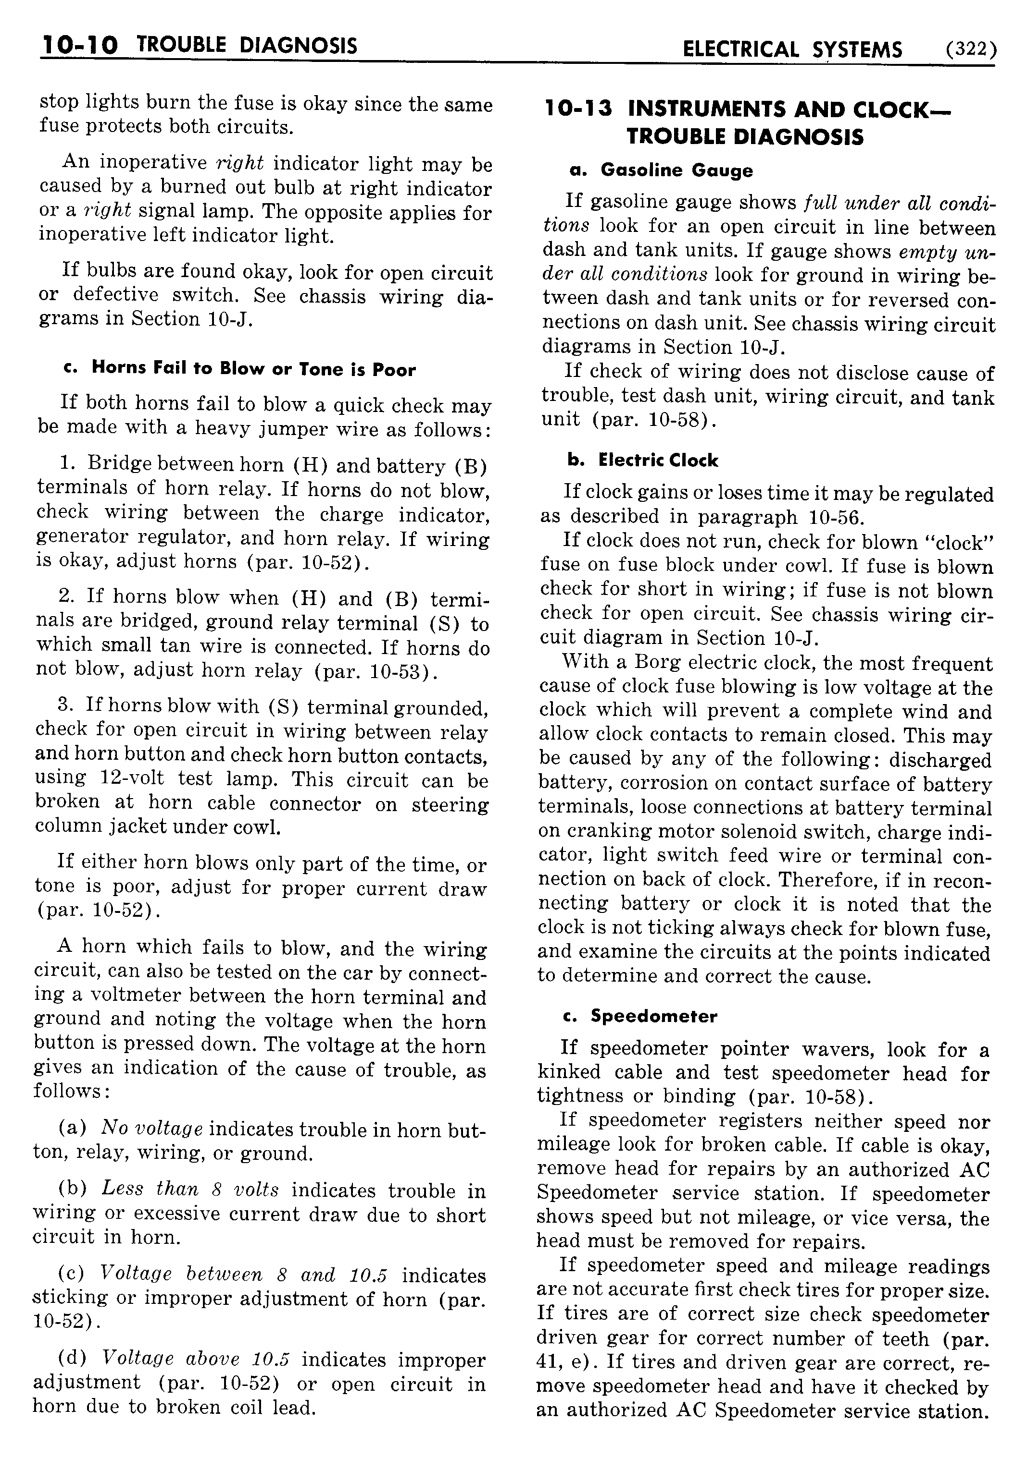 n_11 1954 Buick Shop Manual - Electrical Systems-010-010.jpg